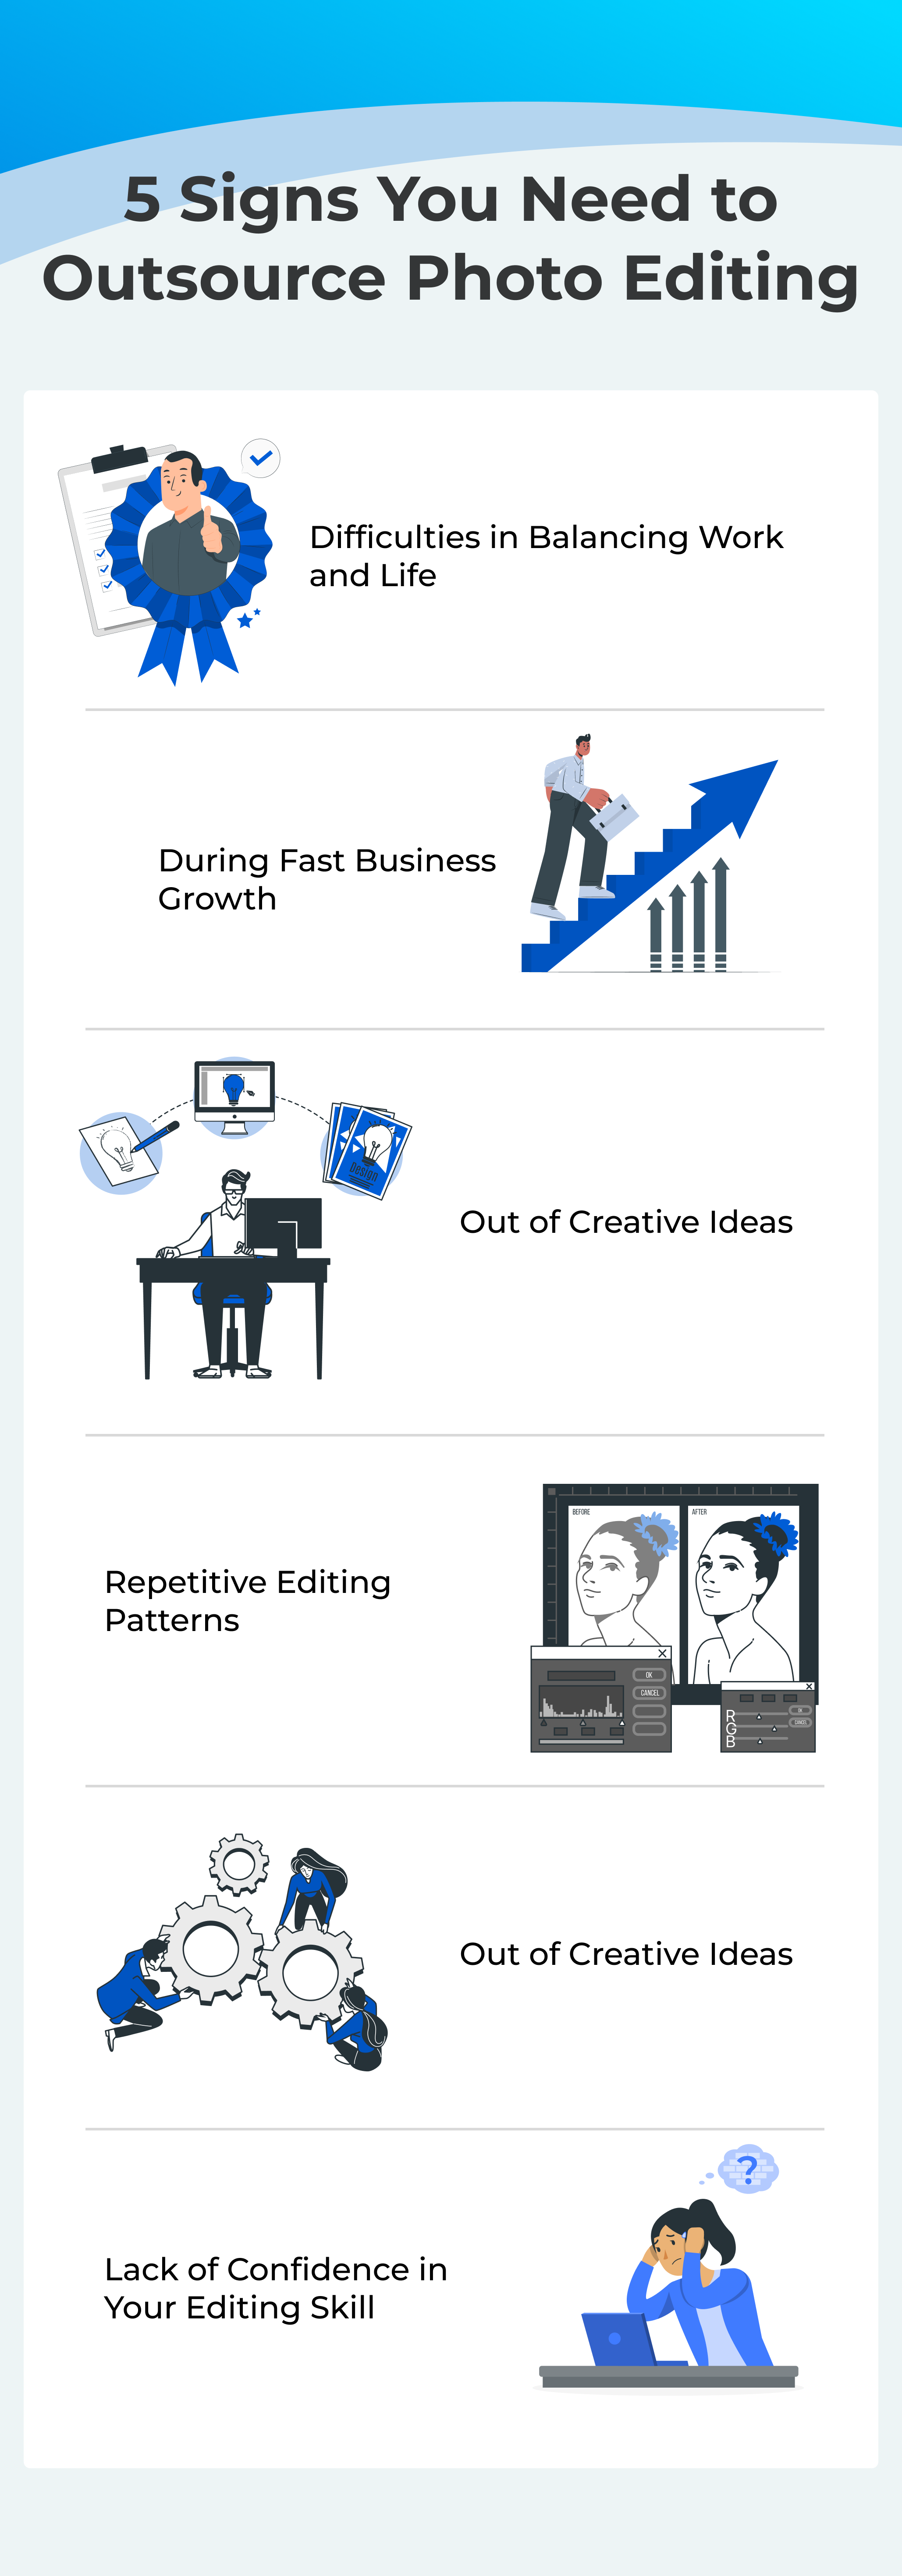 5 Signs you need to outsource photo editing - Infographic